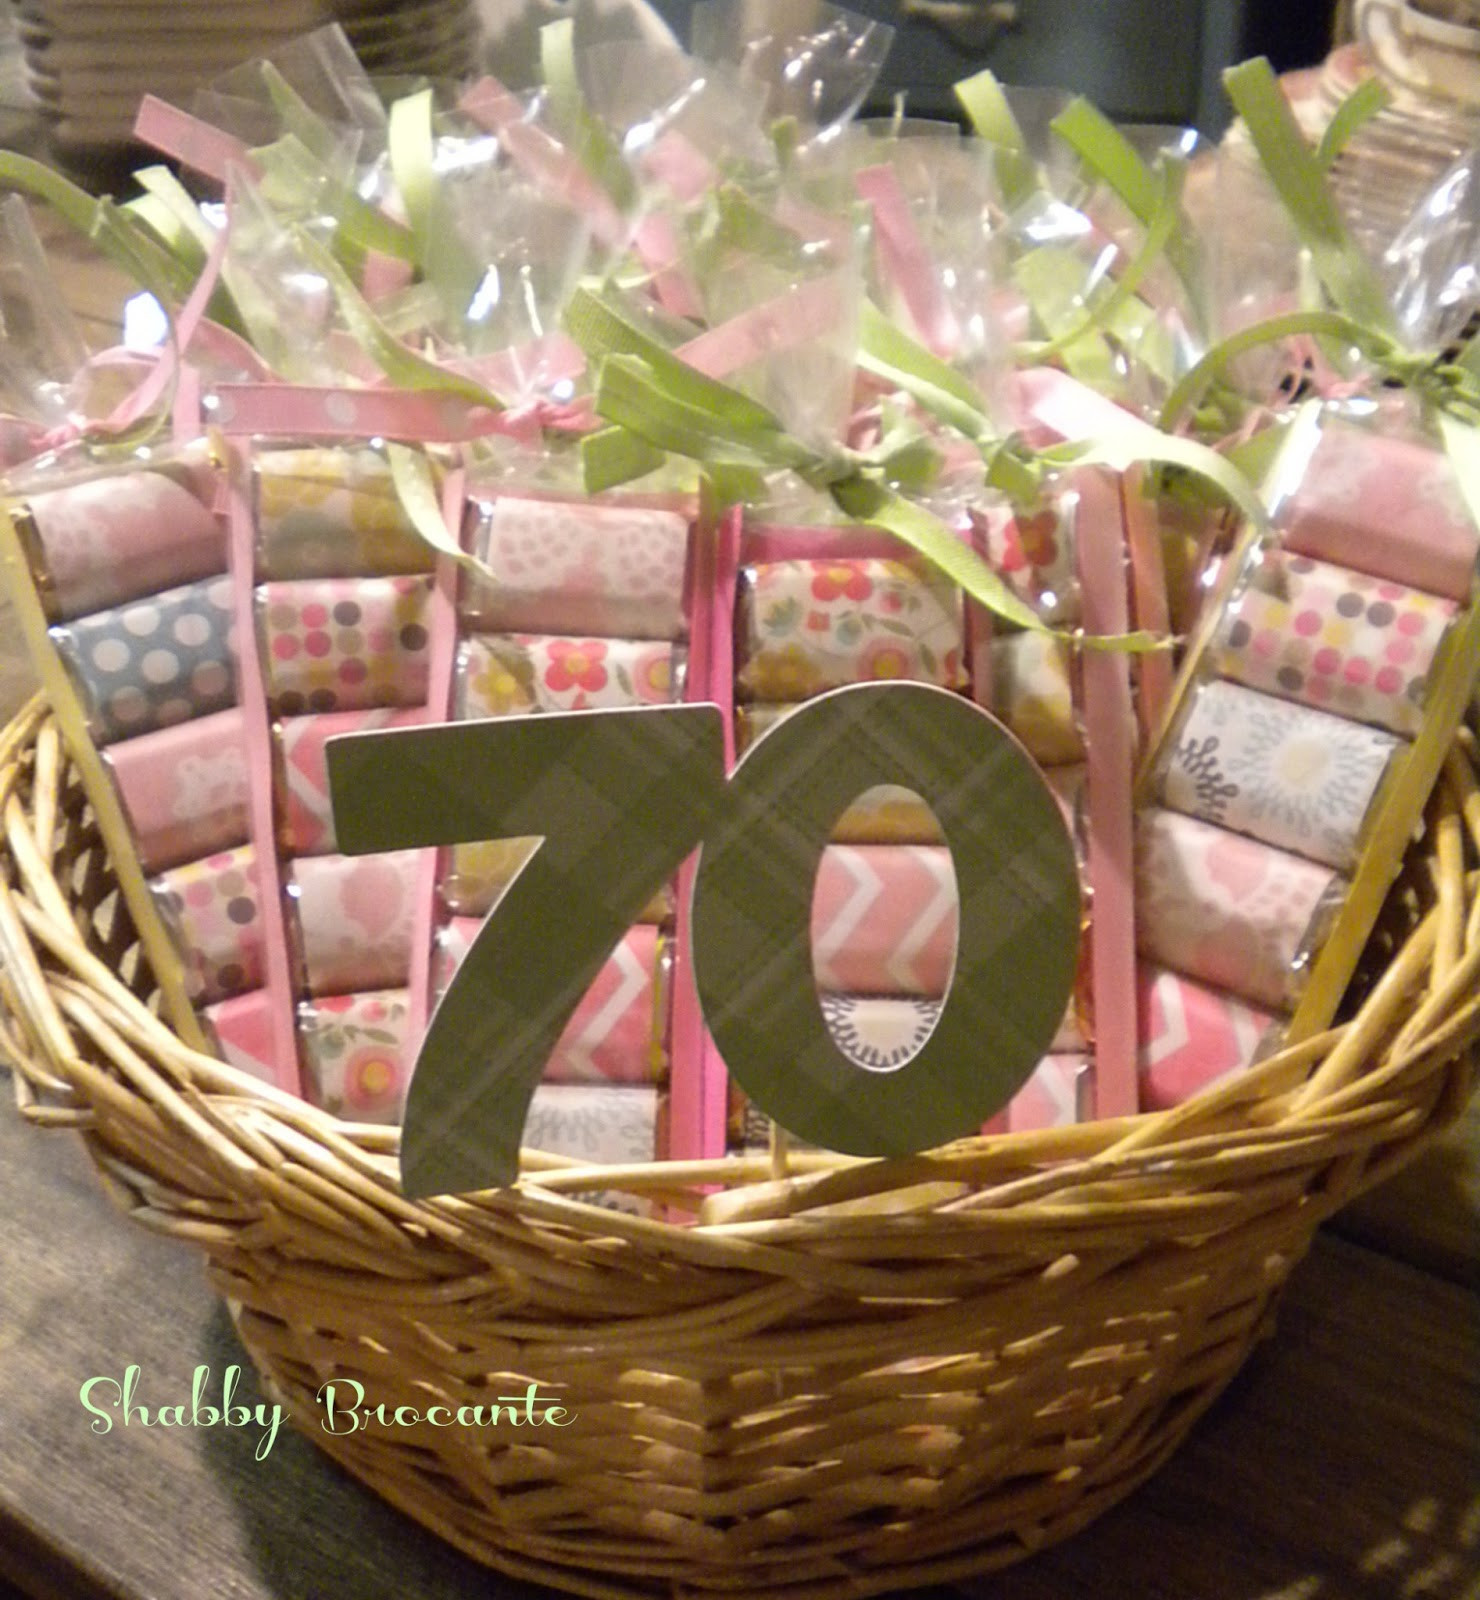 Birthday Party Favor Ideas For Adults
 Shabby Brocante Hersey s Adult Party Favors